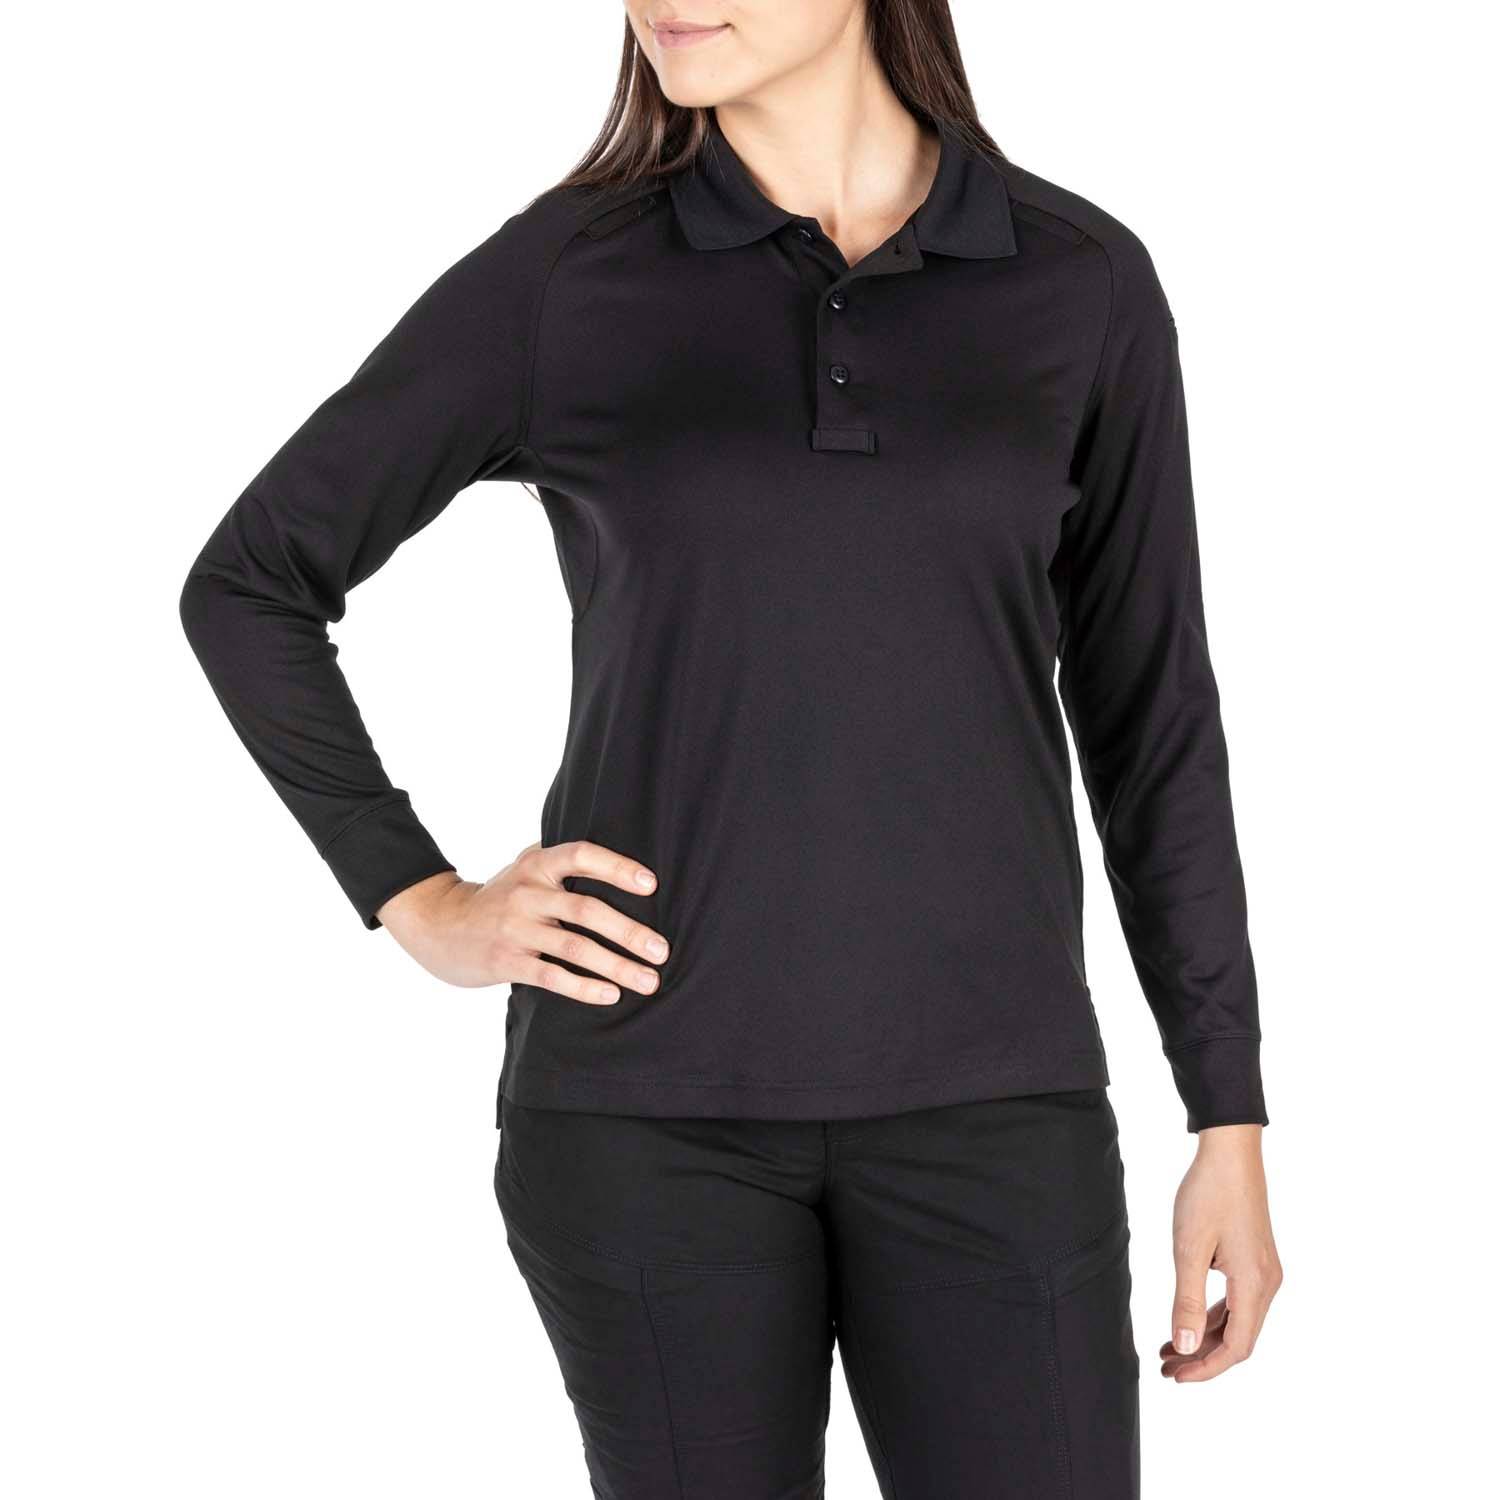 5.11 TACTICAL WOMEN'S LONG SLEEVE PERFORMANCE POLO